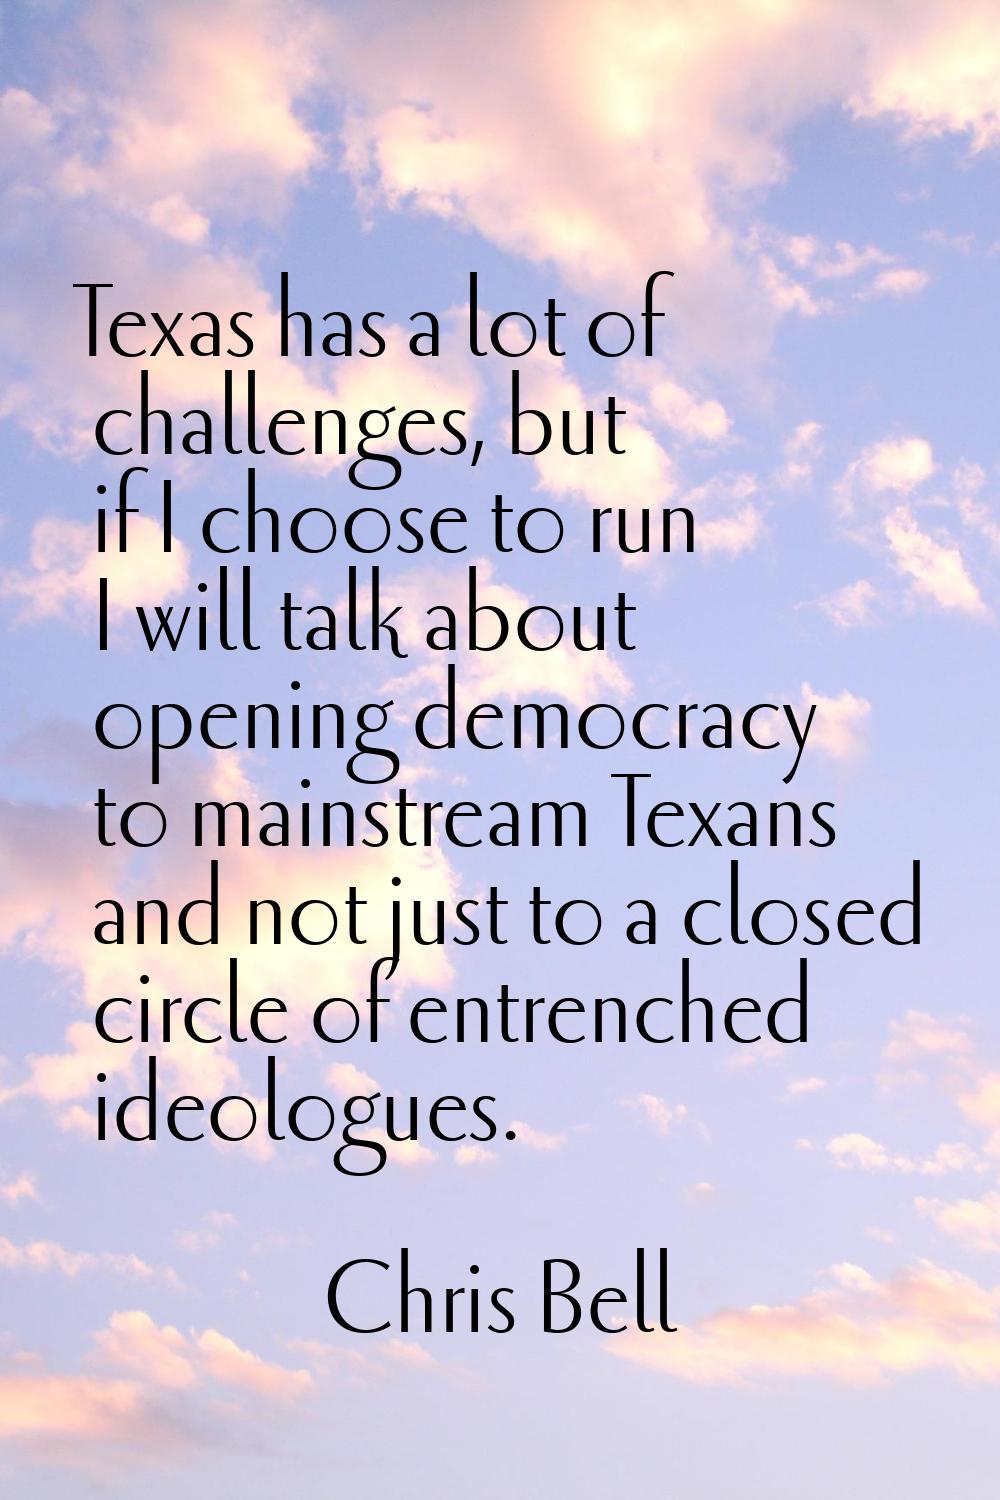 Texas has a lot of challenges, but if I choose to run I will talk about opening democracy to mainst